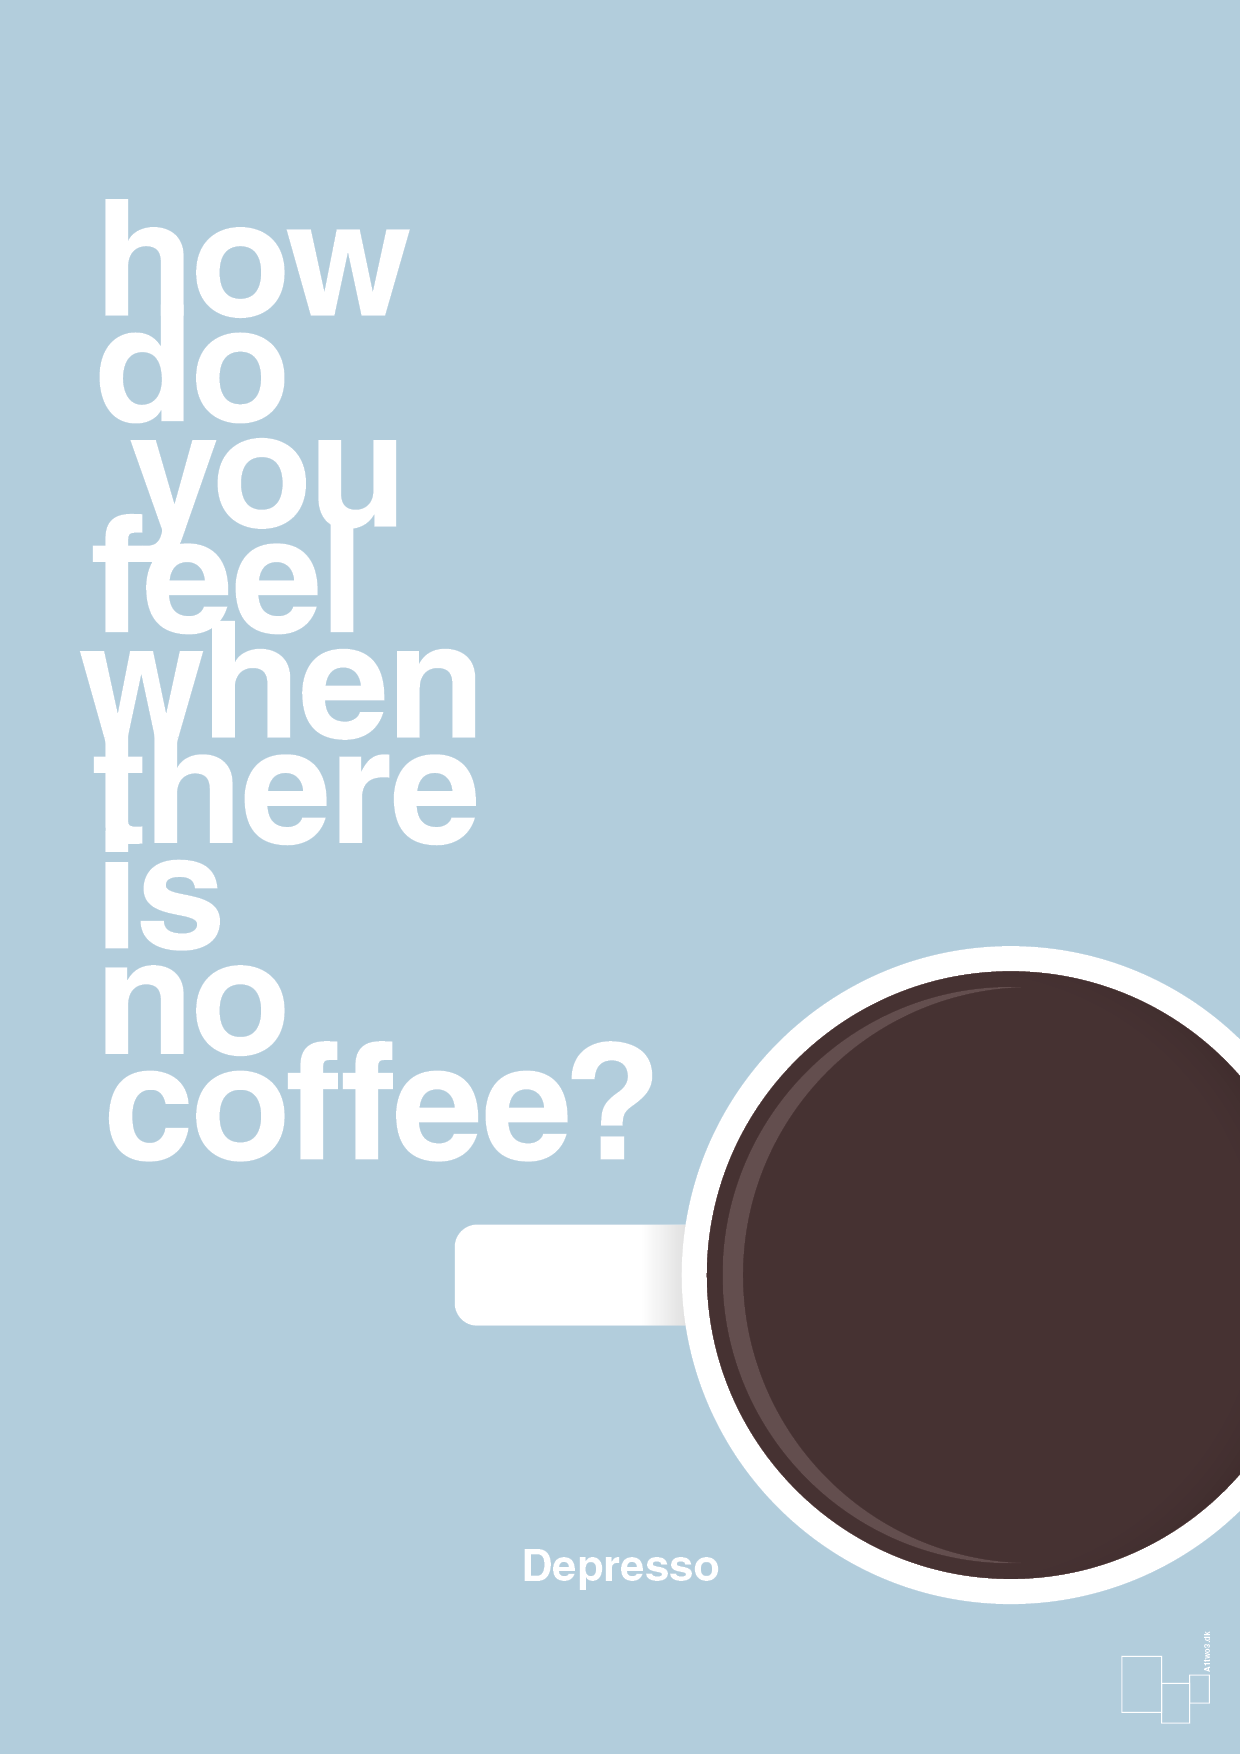 how do you feel when there is no coffee? depresso - Plakat med Mad & Drikke i Heavenly Blue